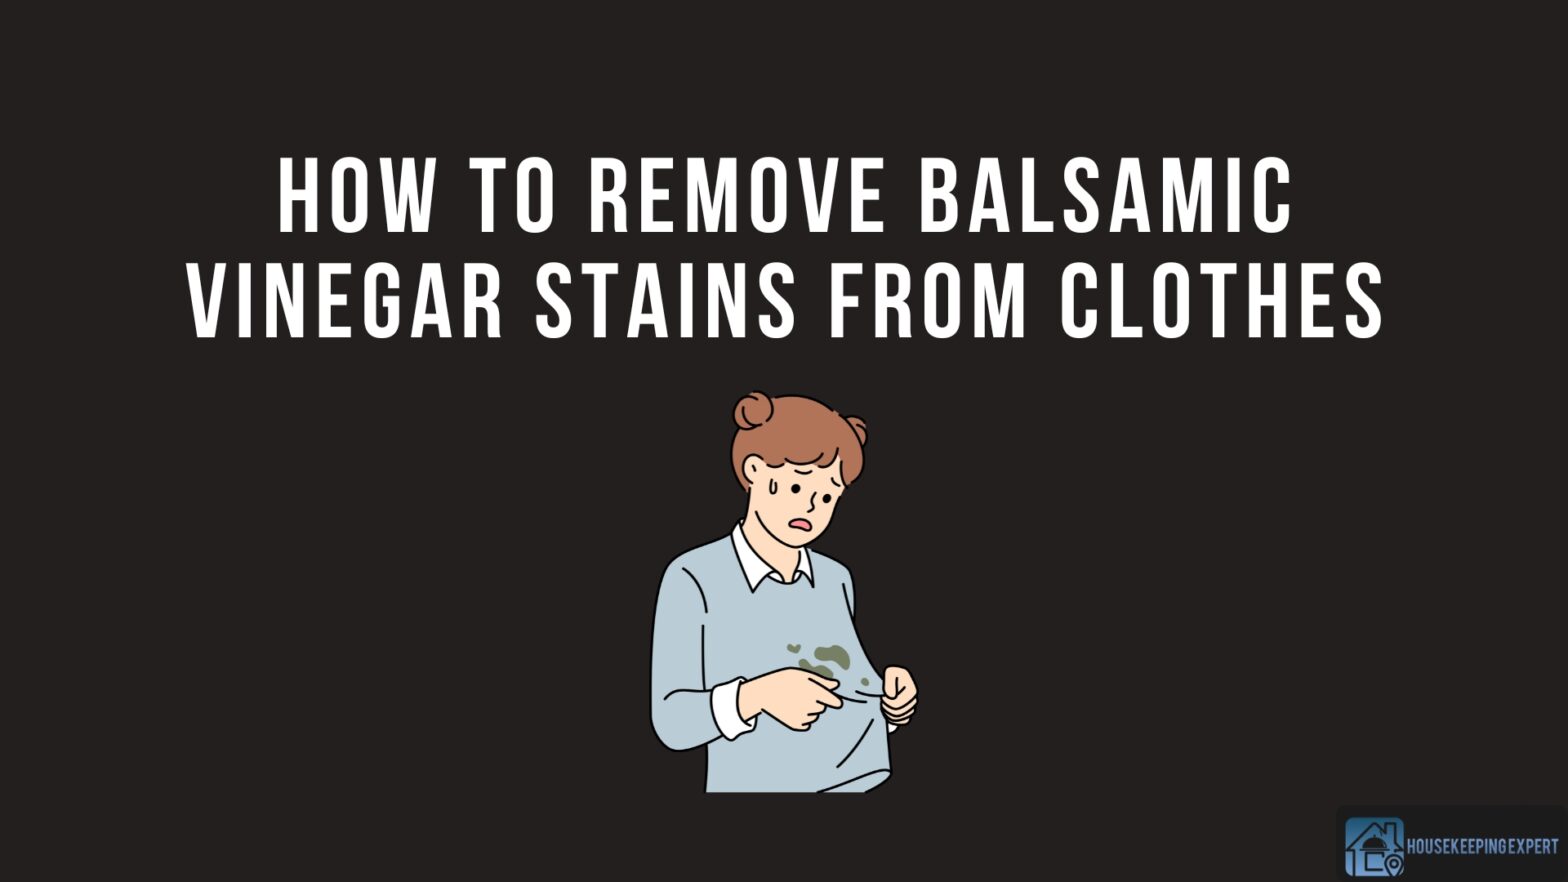 How To Remove Balsamic Vinegar Stains From Clothes